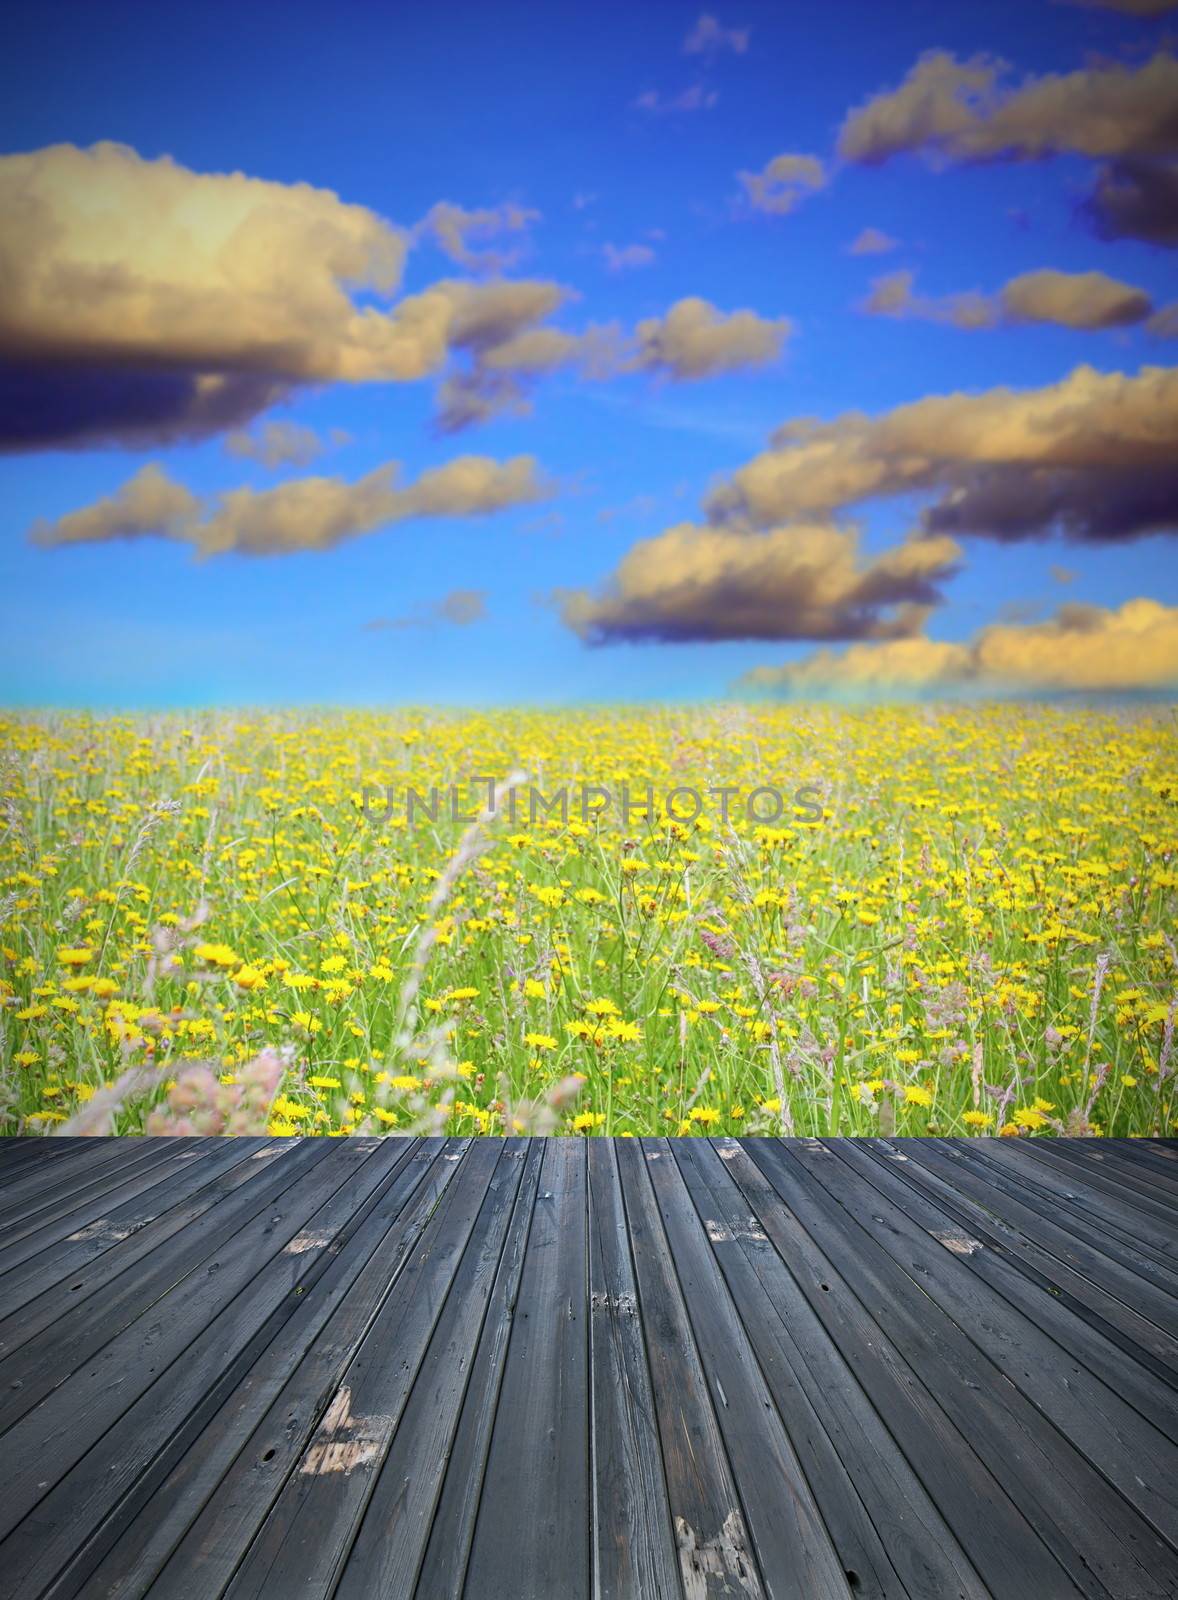 old wood floor and field with flowers by taviphoto